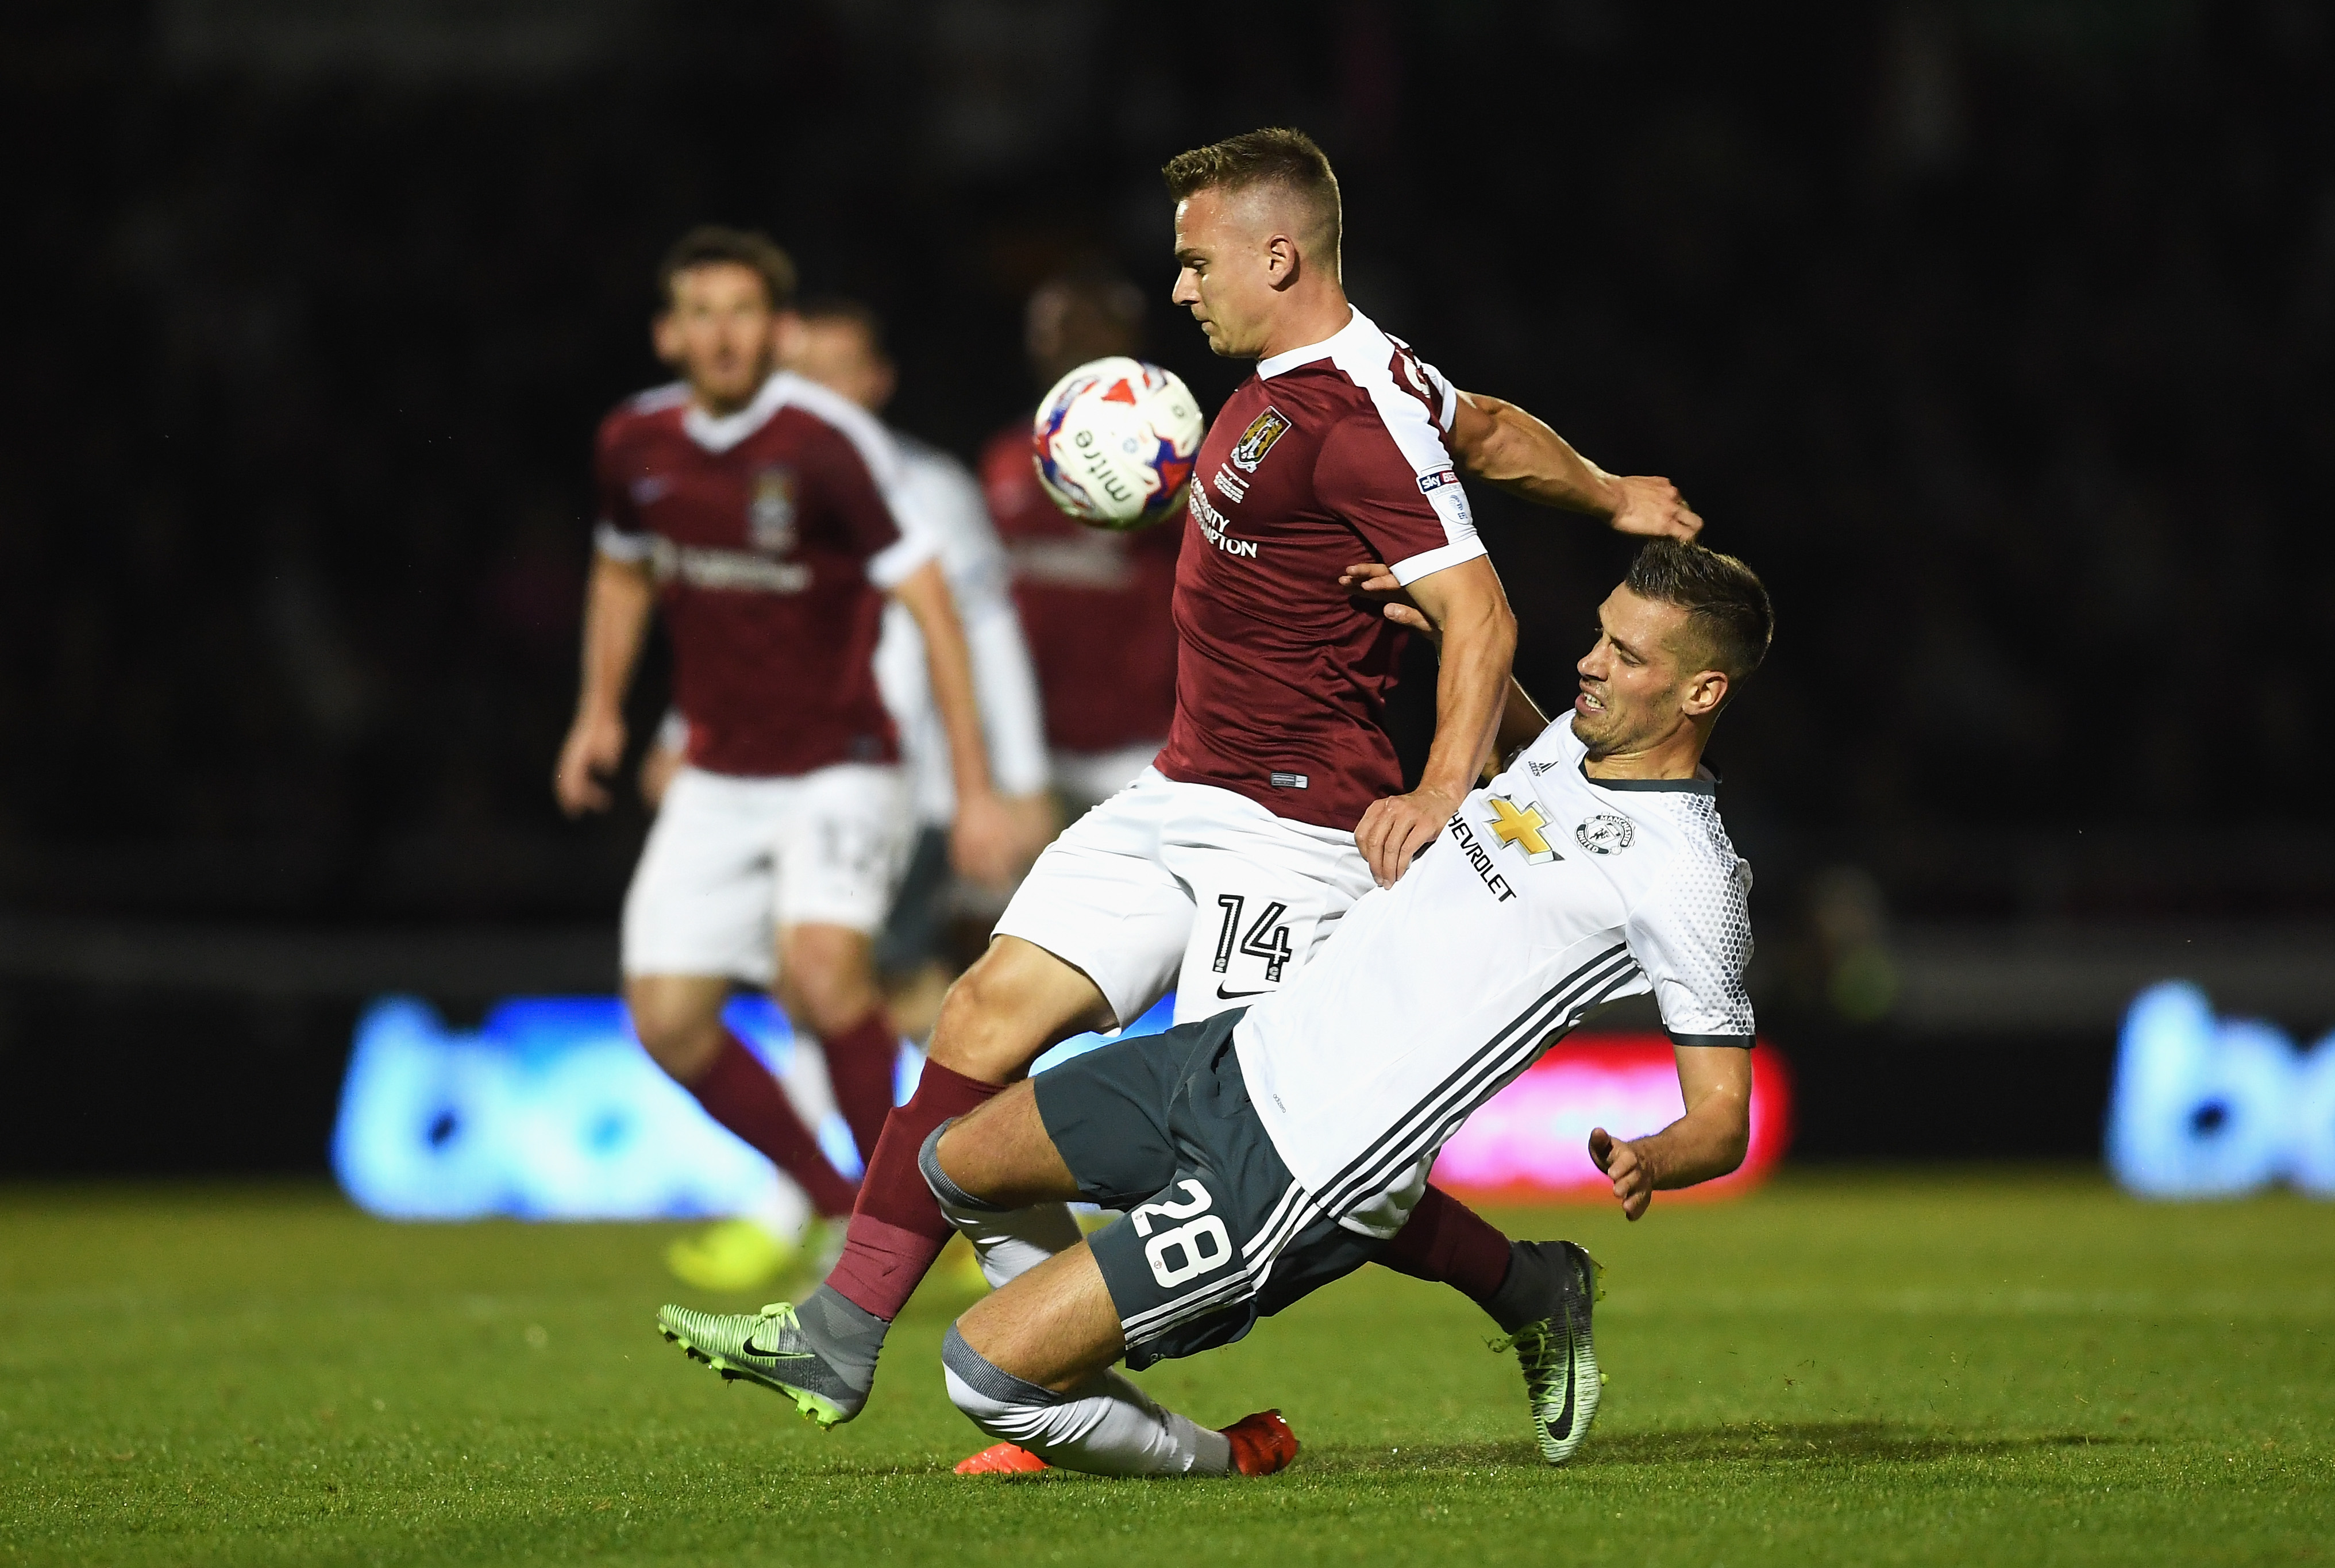 NORTHAMPTON, ENGLAND - SEPTEMBER 21:  Sam Hoskins of Northampton Town is tackled by Morgan Schneiderlin of Manchester United during the  EFL Cup Third Round match between Northampton Town and Manchester United at Sixfields on September 21, 2016 in Northampton, England.  (Photo by Laurence Griffiths/Getty Images)